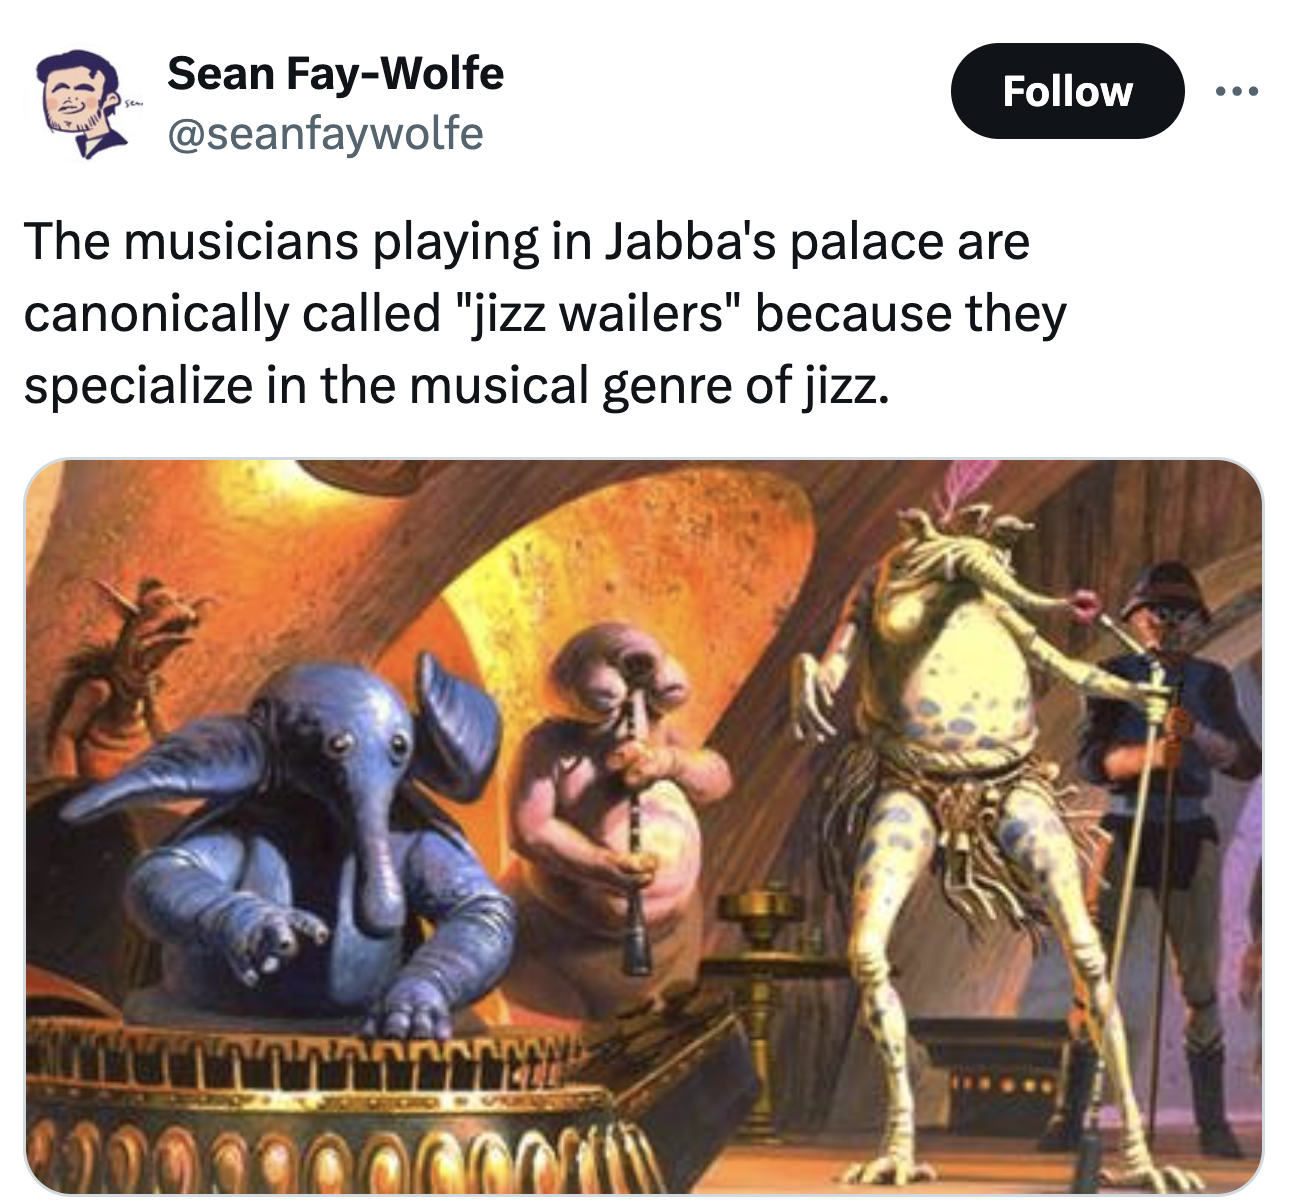 party star wars gif - Sean FayWolfe The musicians playing in Jabba's palace are canonically called "jizz wailers" because they specialize in the musical genre of jizz.